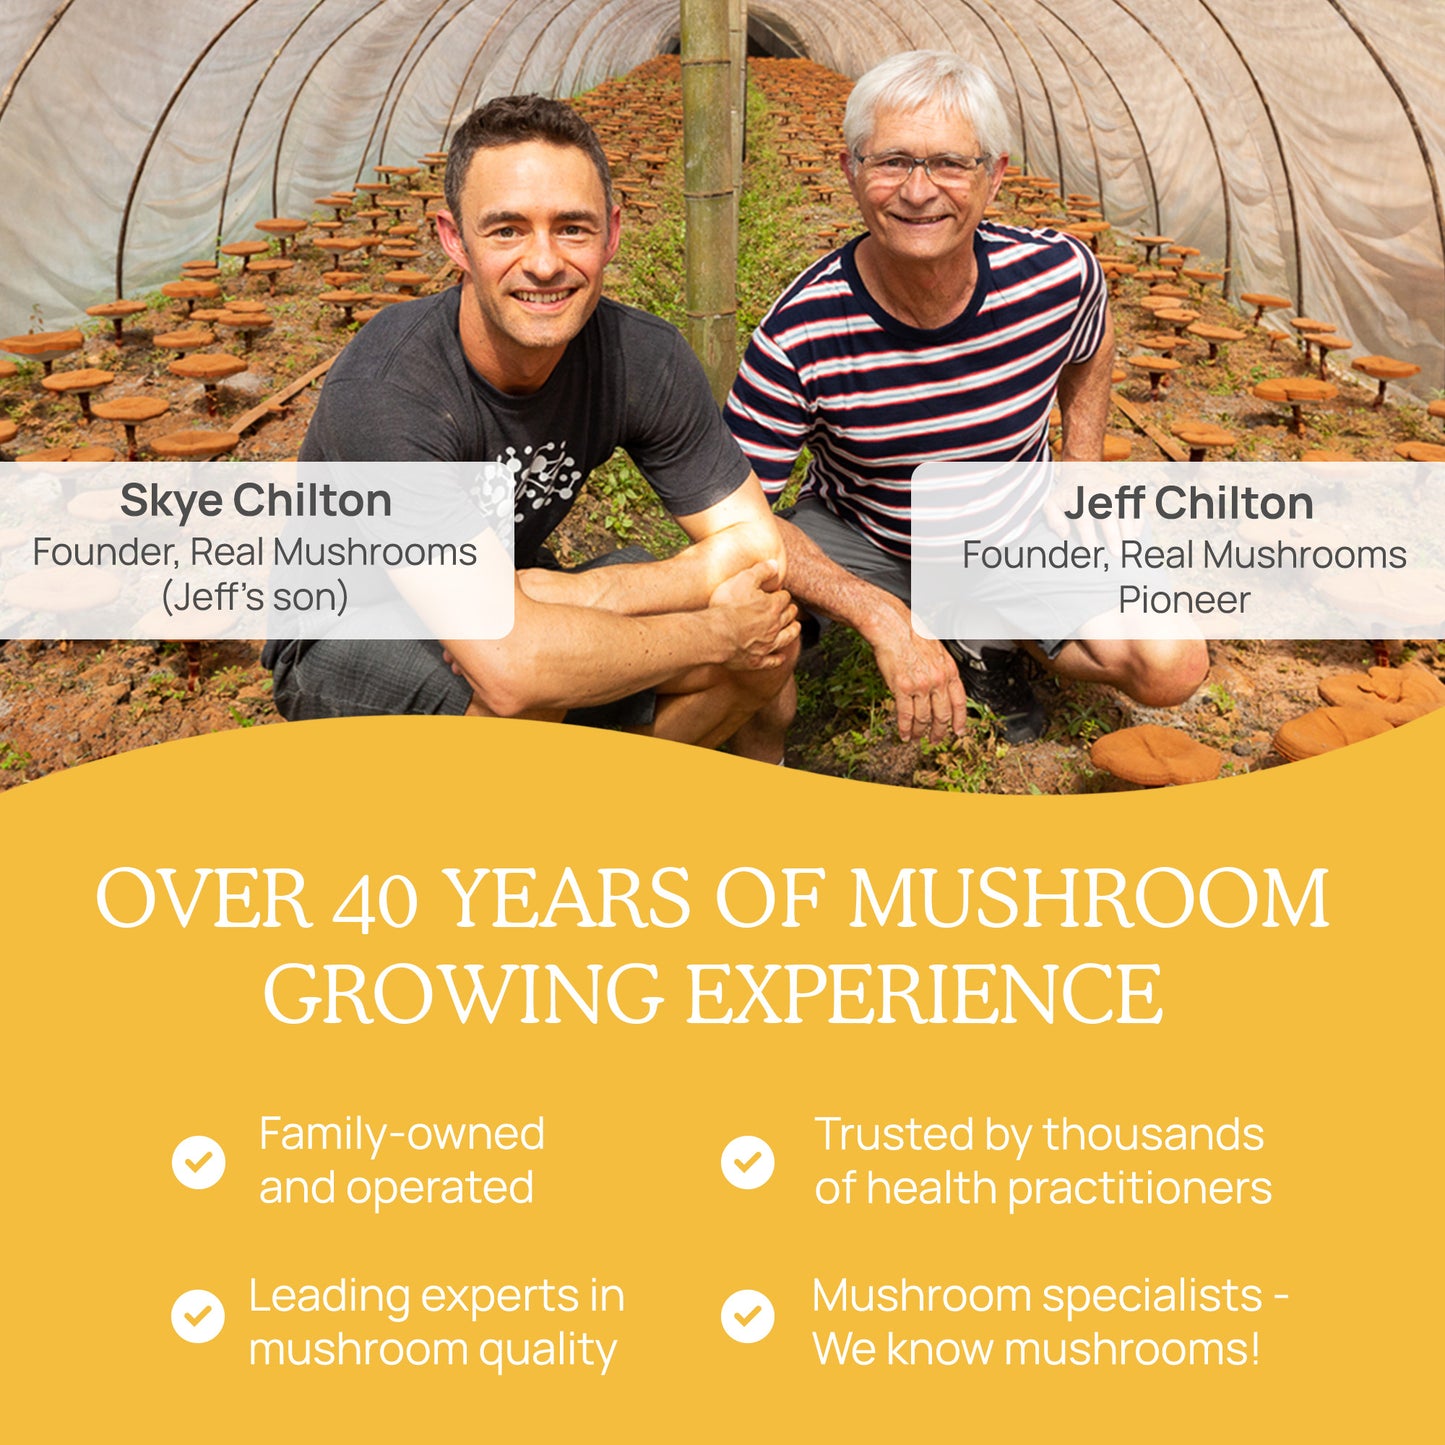 Two individuals, Skye Chilton and Jeff Chilton, smiling inside a greenhouse with cultivated mushrooms, including Real Mushrooms Organic Tremella Extract Capsules, promoting over 40 years of experience in mushroom growing and emphasizing